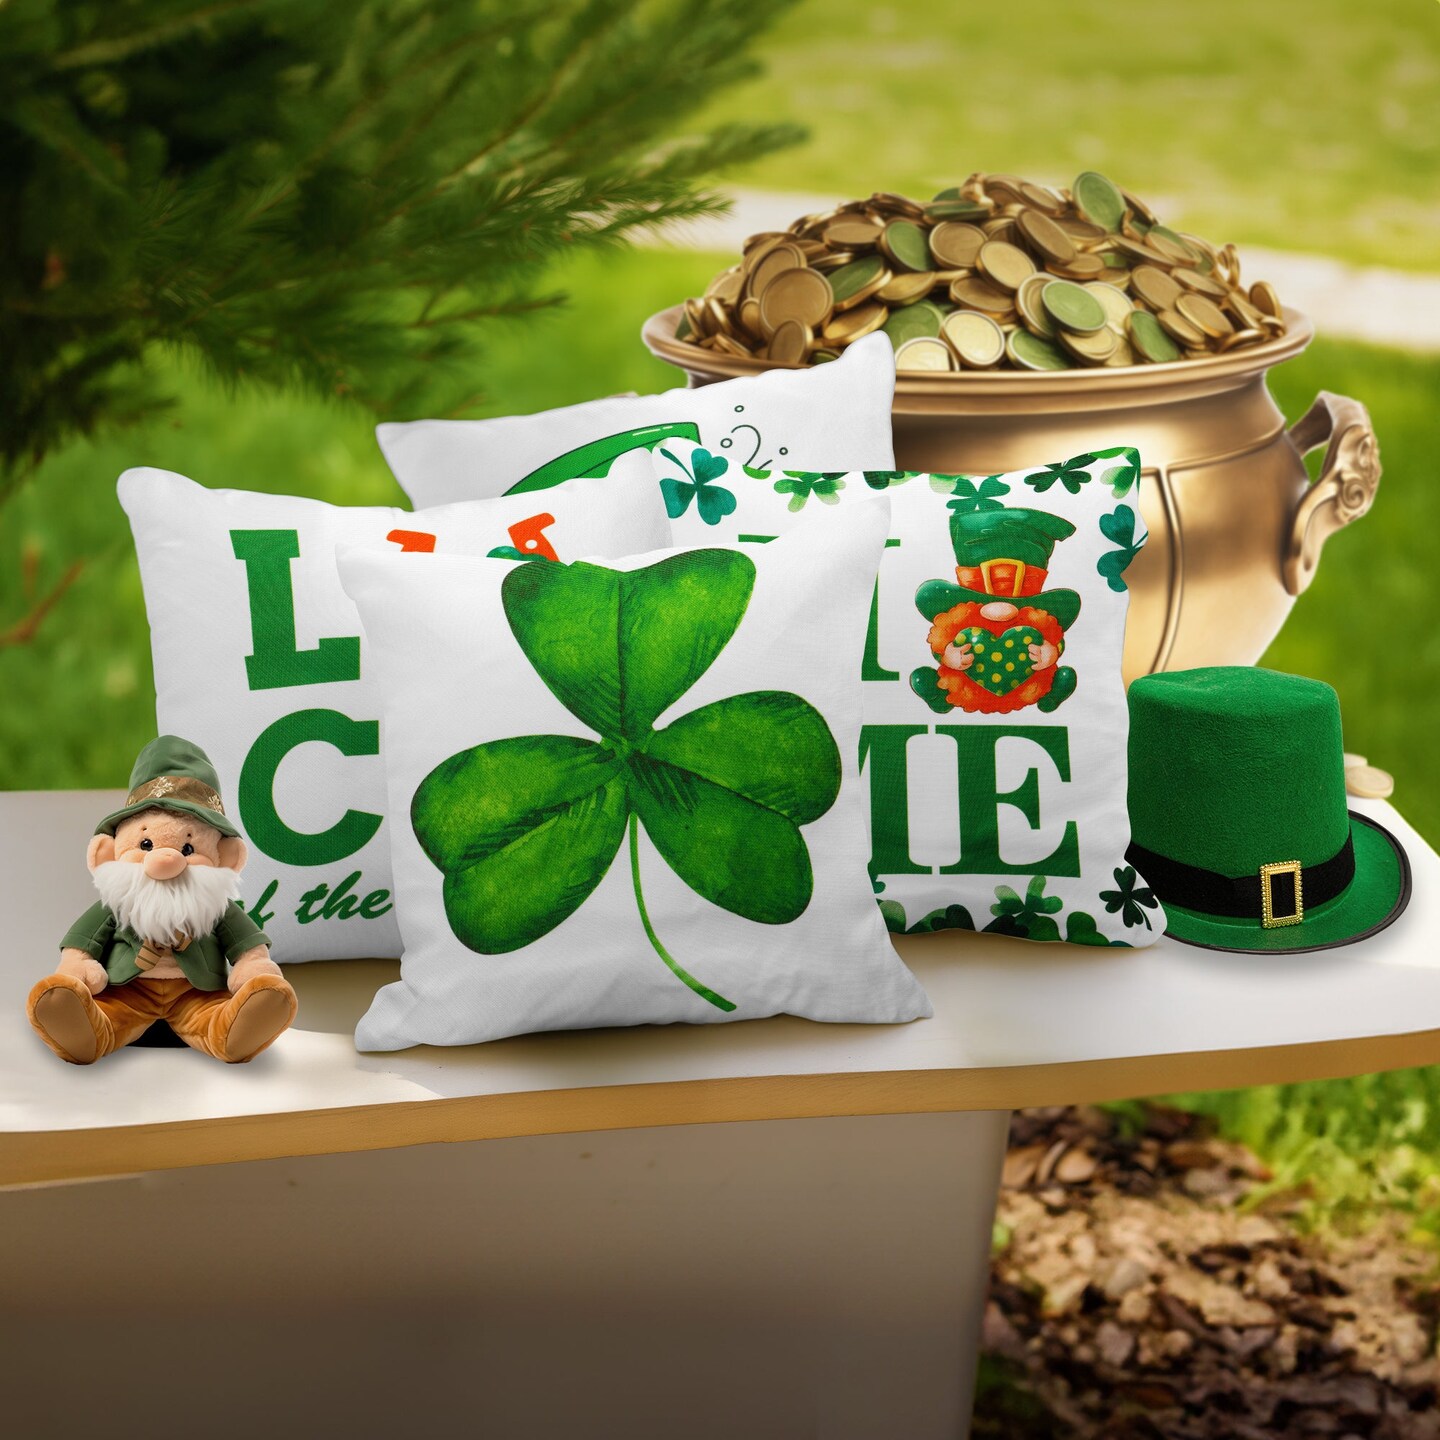 G128 St Patrick&#x2019;s Day Decoration Gnome Luck Shamrock Waterproof Throw Pillow | 18 x 18 in | Set of 4, Beautiful Cushion Covers for St Patrick&#x2019;s Day Sofa Couch Decoration, Pillow Insert Included